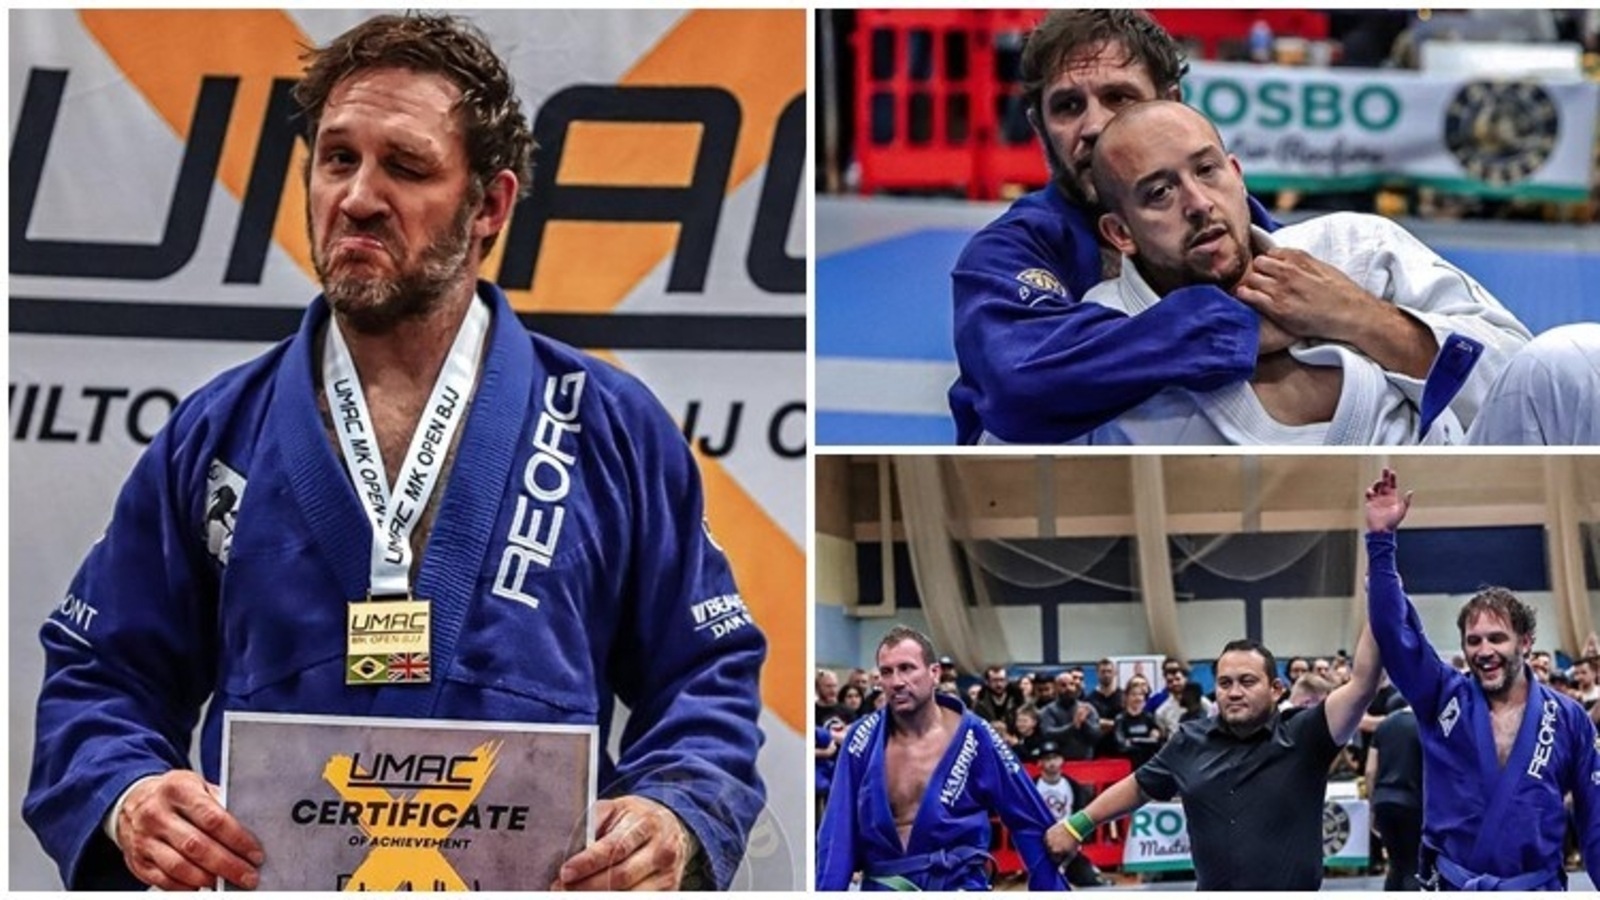 hollywood-star-tom-hardy-wins-jiu-jitsu-competition-earns-opponent-s-respect